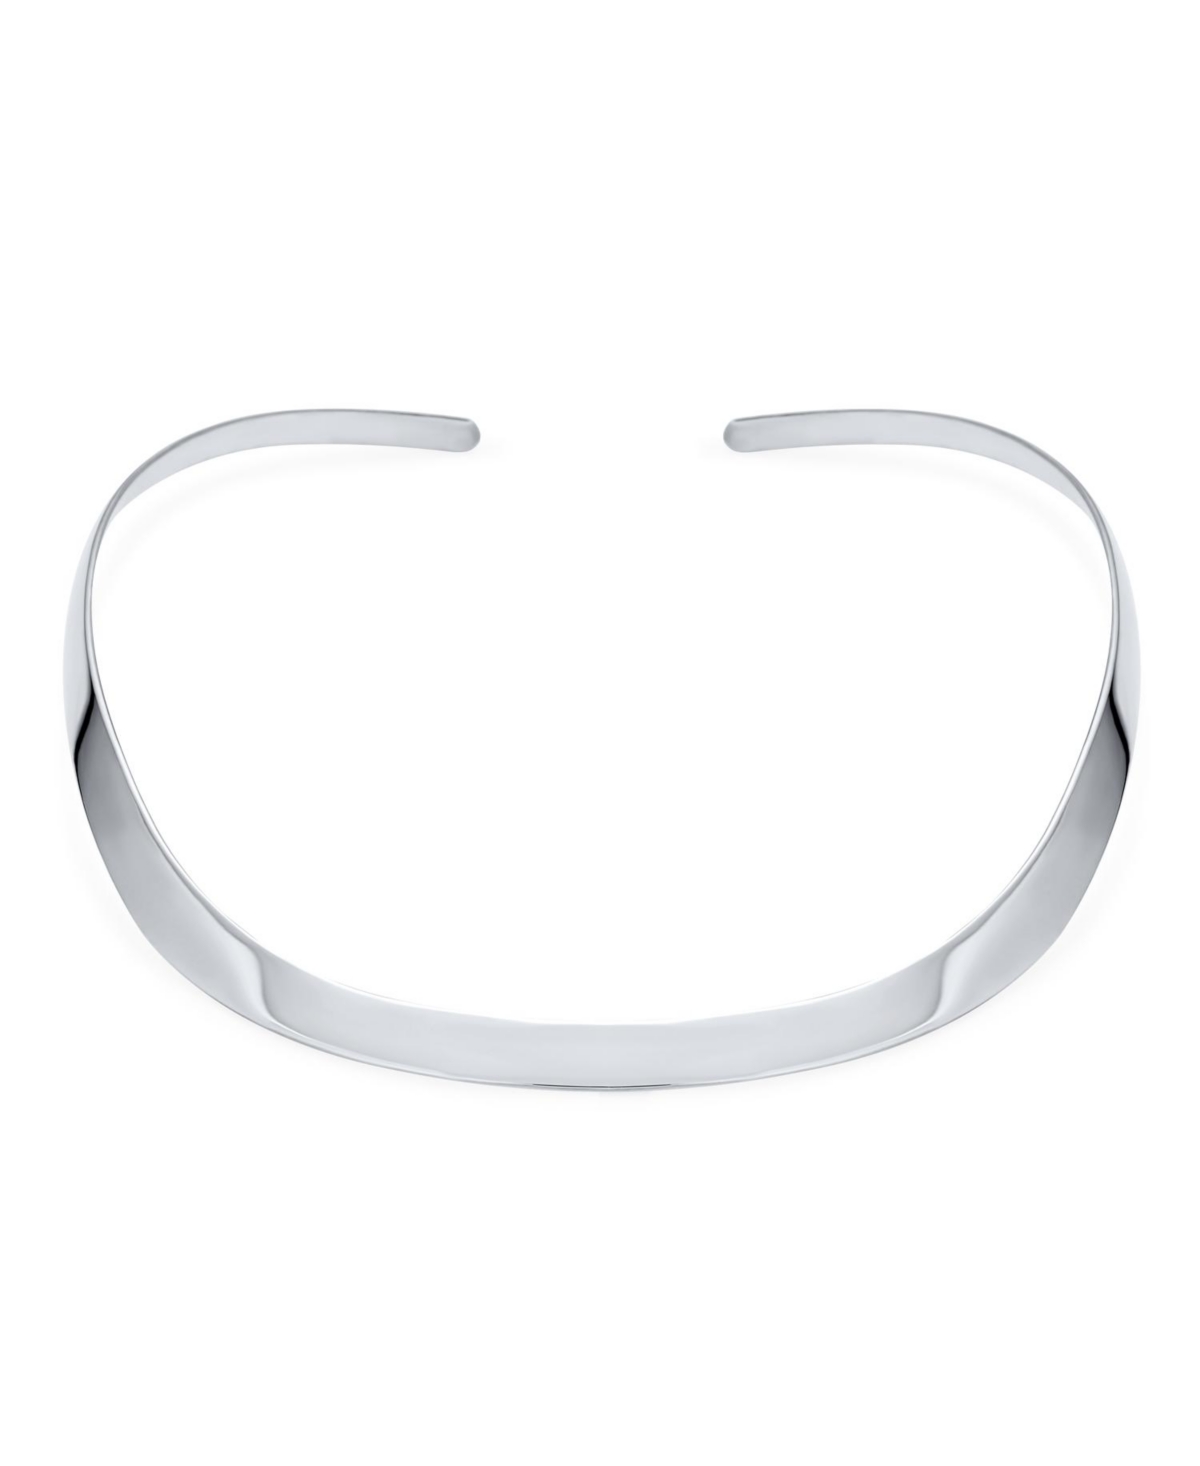 Classic Simple Plain Flat Slider Contoured Collar Curved Statement Choker Necklace For Women Polished.925 Silver Sterling 8MM - Silver